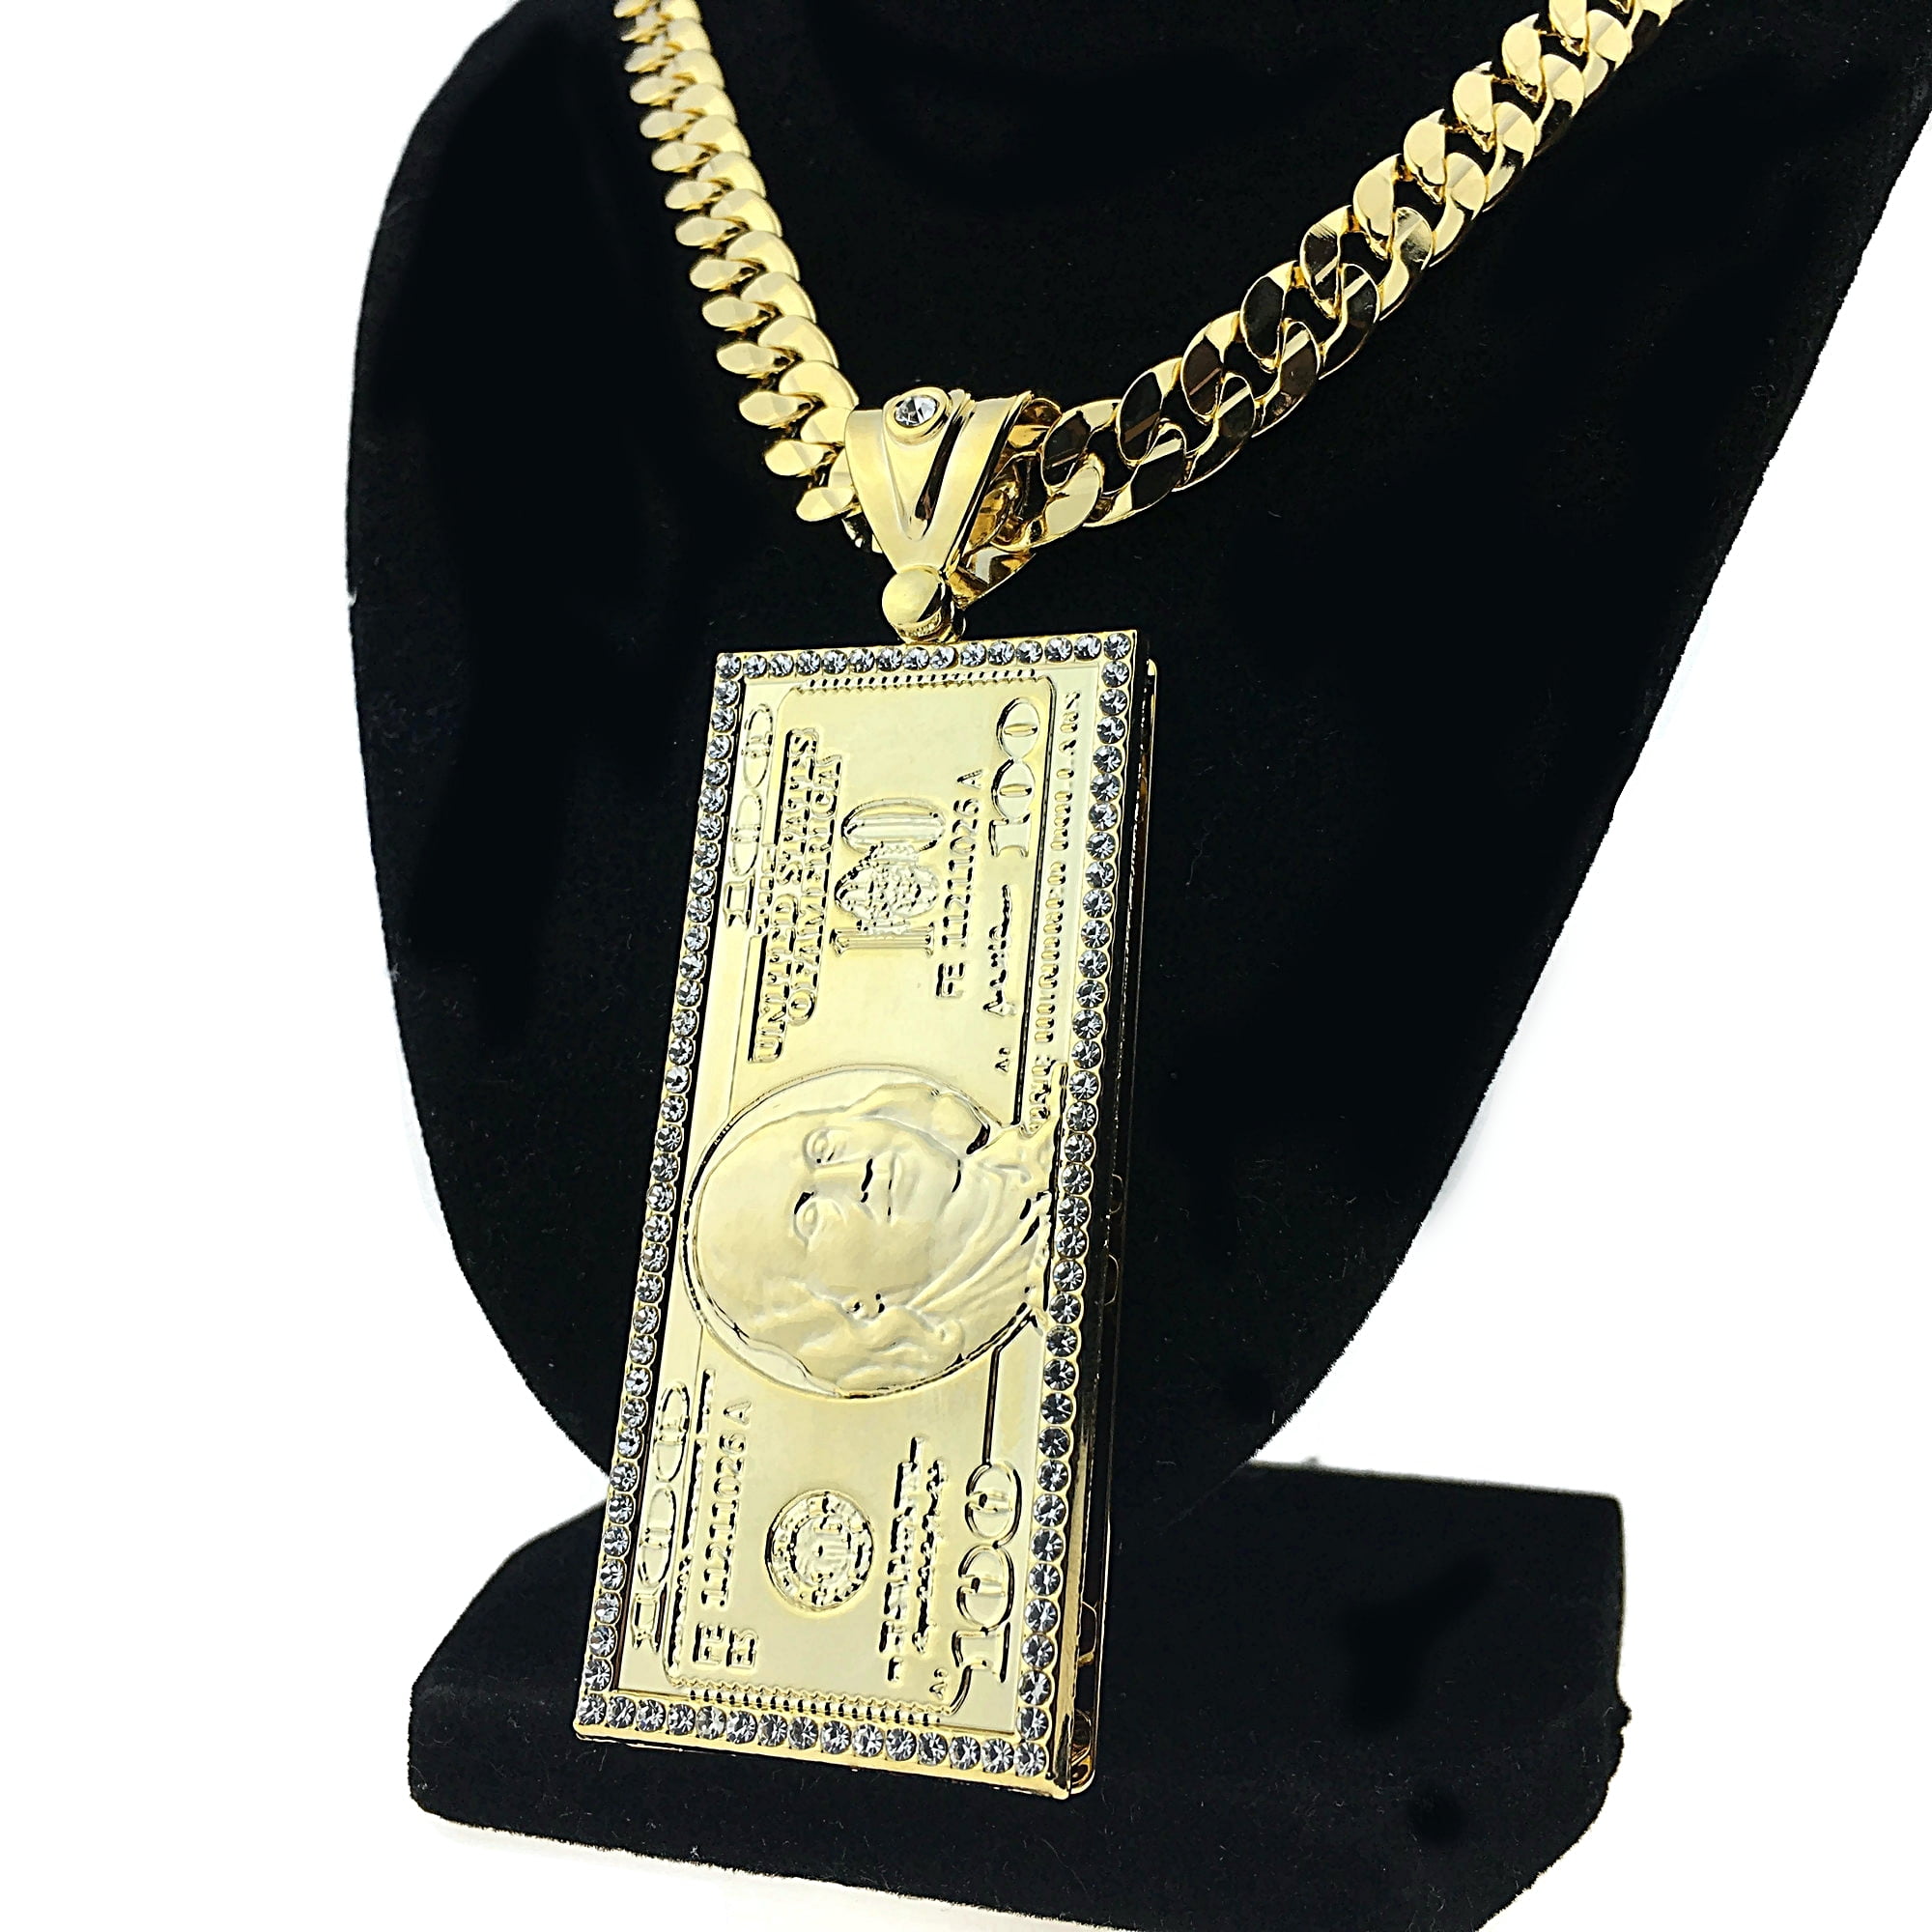 One Hundred Dollar Bill Pendant 14k Gold Tone IcedOut $100 Cash Money Free Chain 